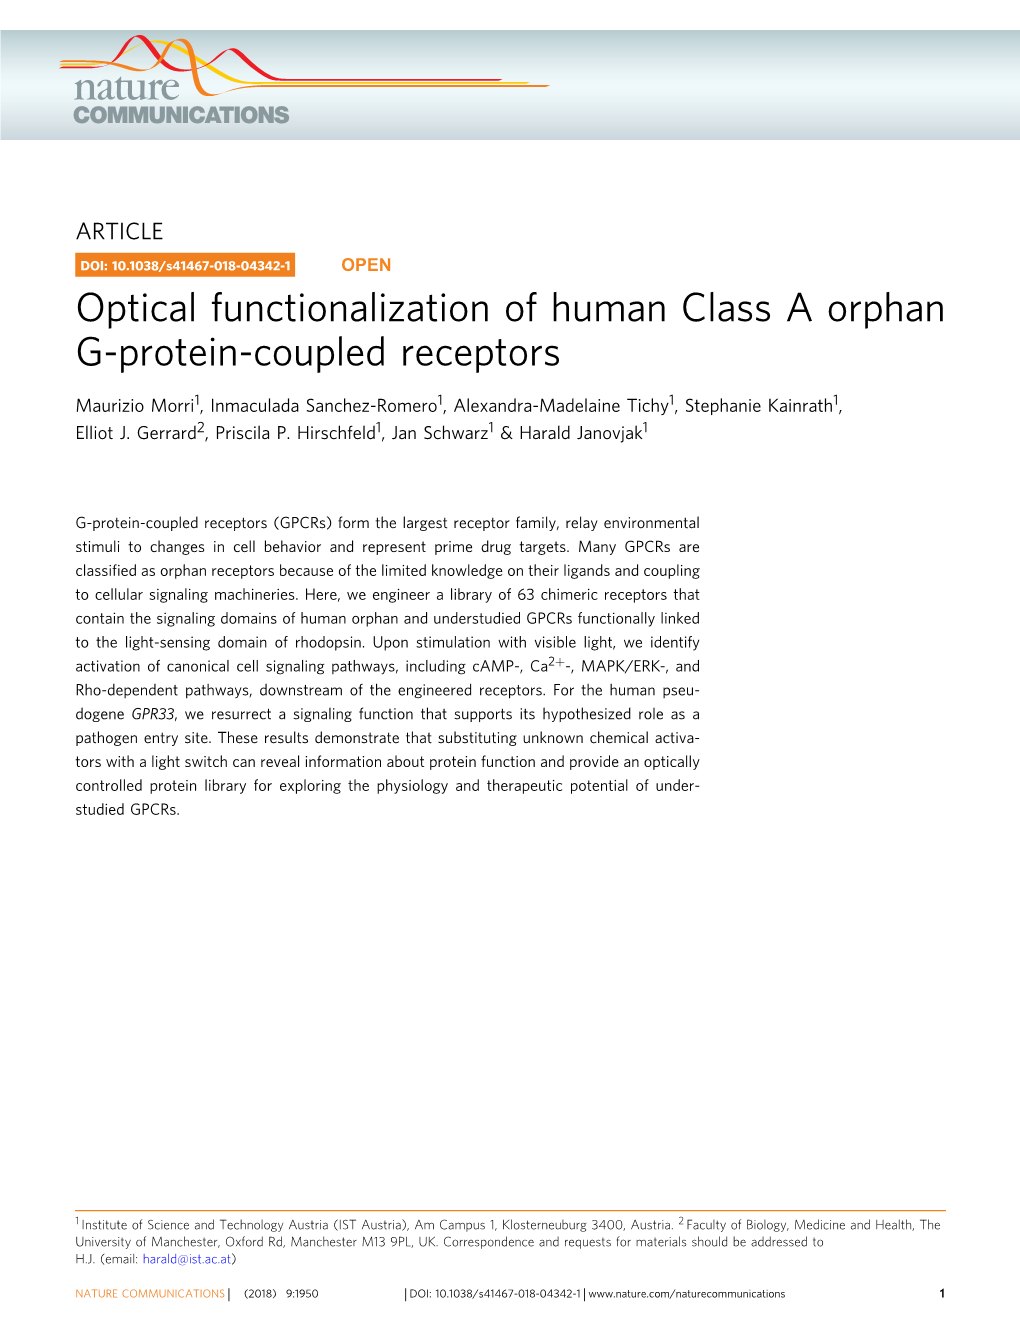 Optical Functionalization of Human Class a Orphan G-Protein-Coupled Receptors